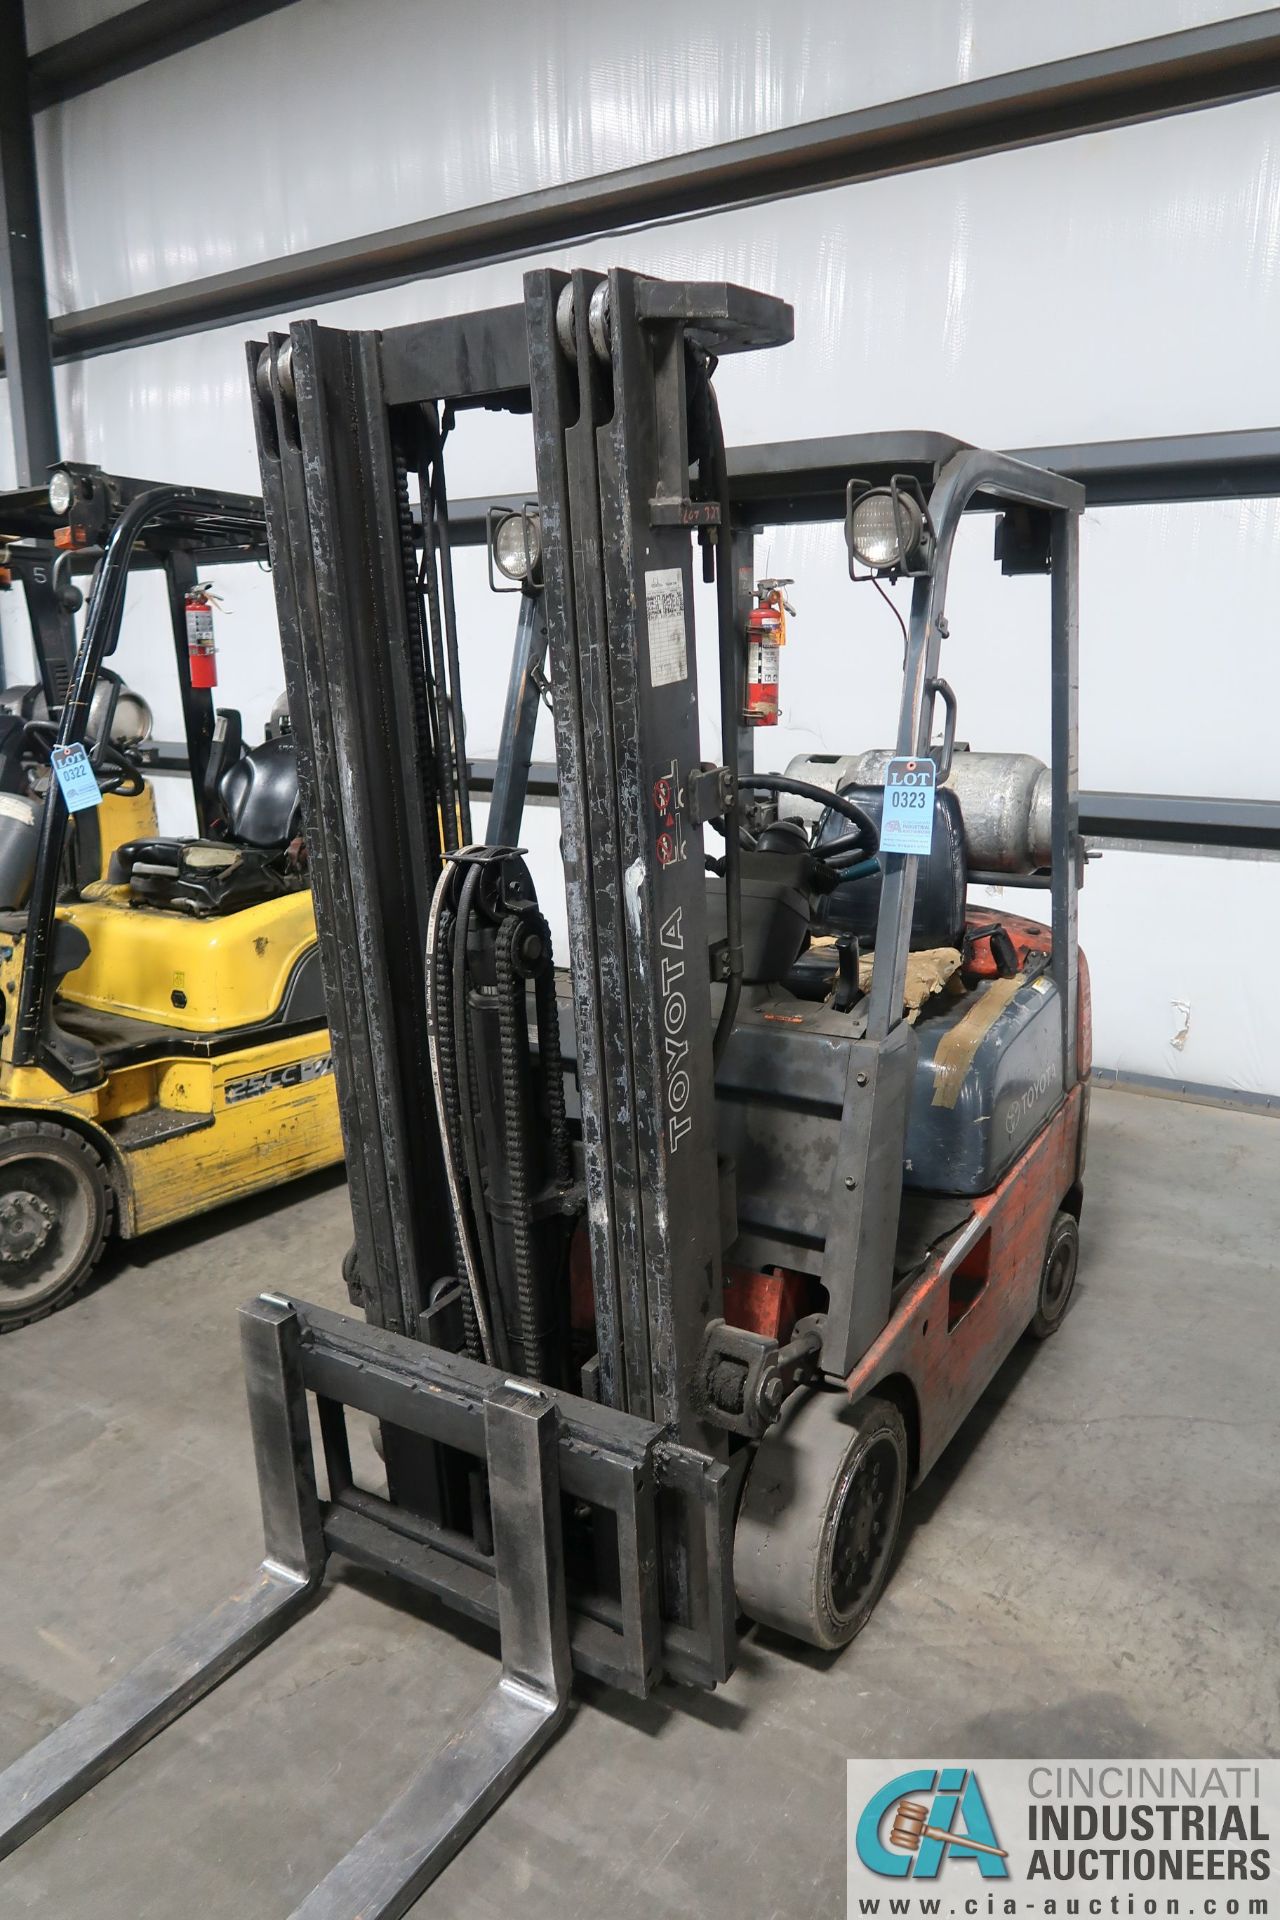 3,000 LB. TOYOTA MODLE 7FGU15 SOLID TIRE LP GAS LIFT TRUCK; S/N 60891, 3-STAGE MAST, 82" MAST